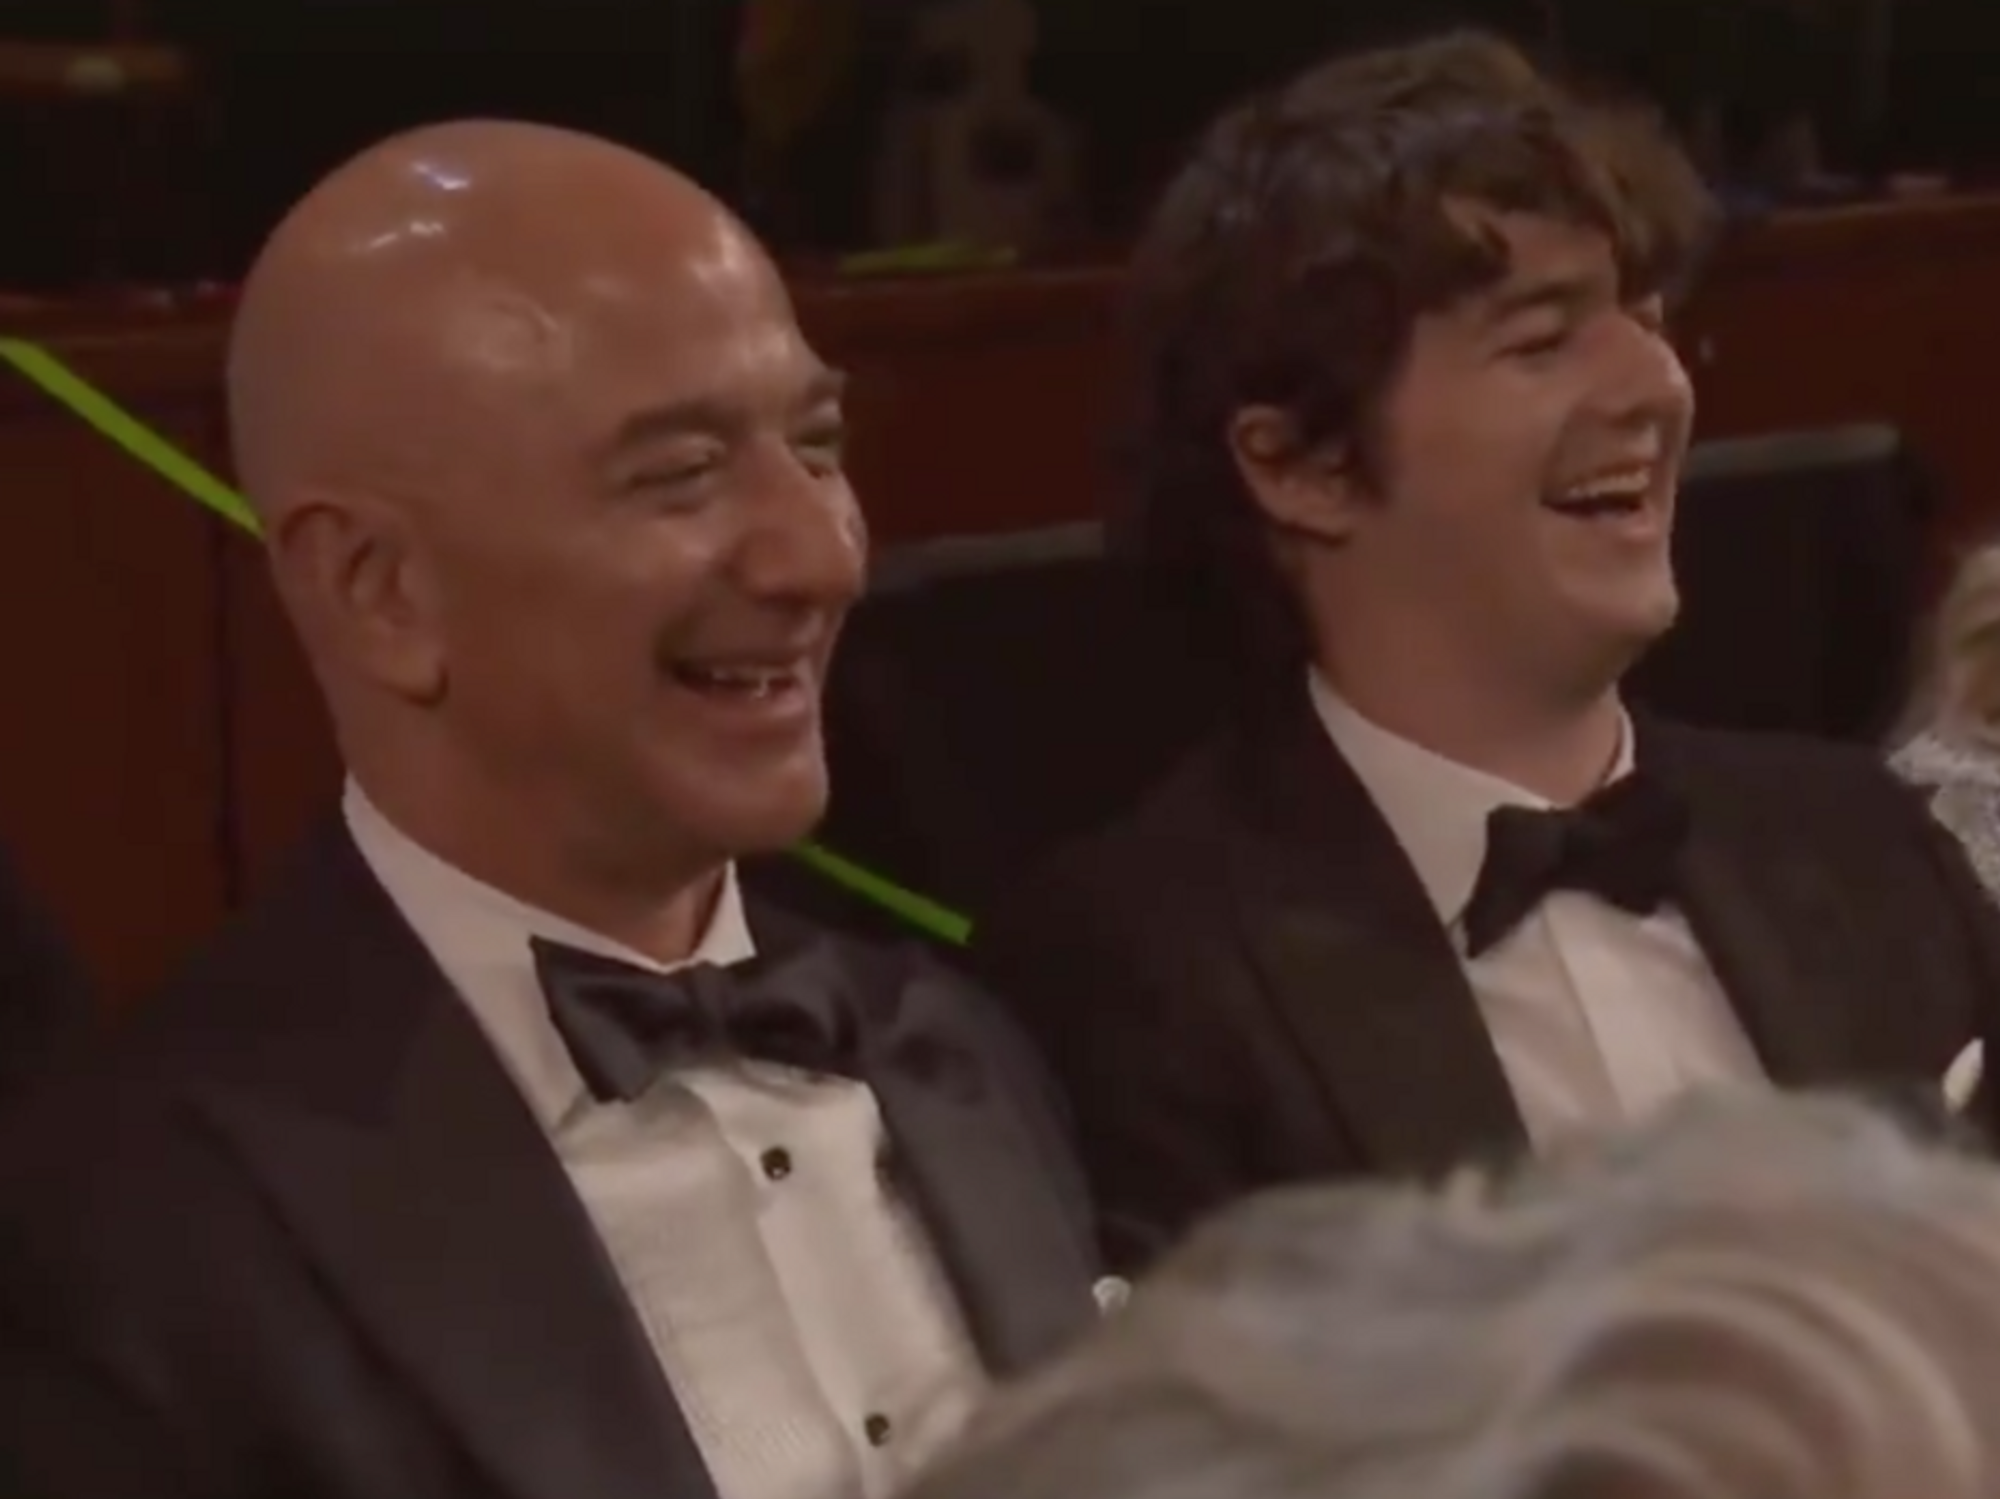 ‘Jeff Bezos is So Rich … ‘: Amazon CEO Called Out During Oscars Opening